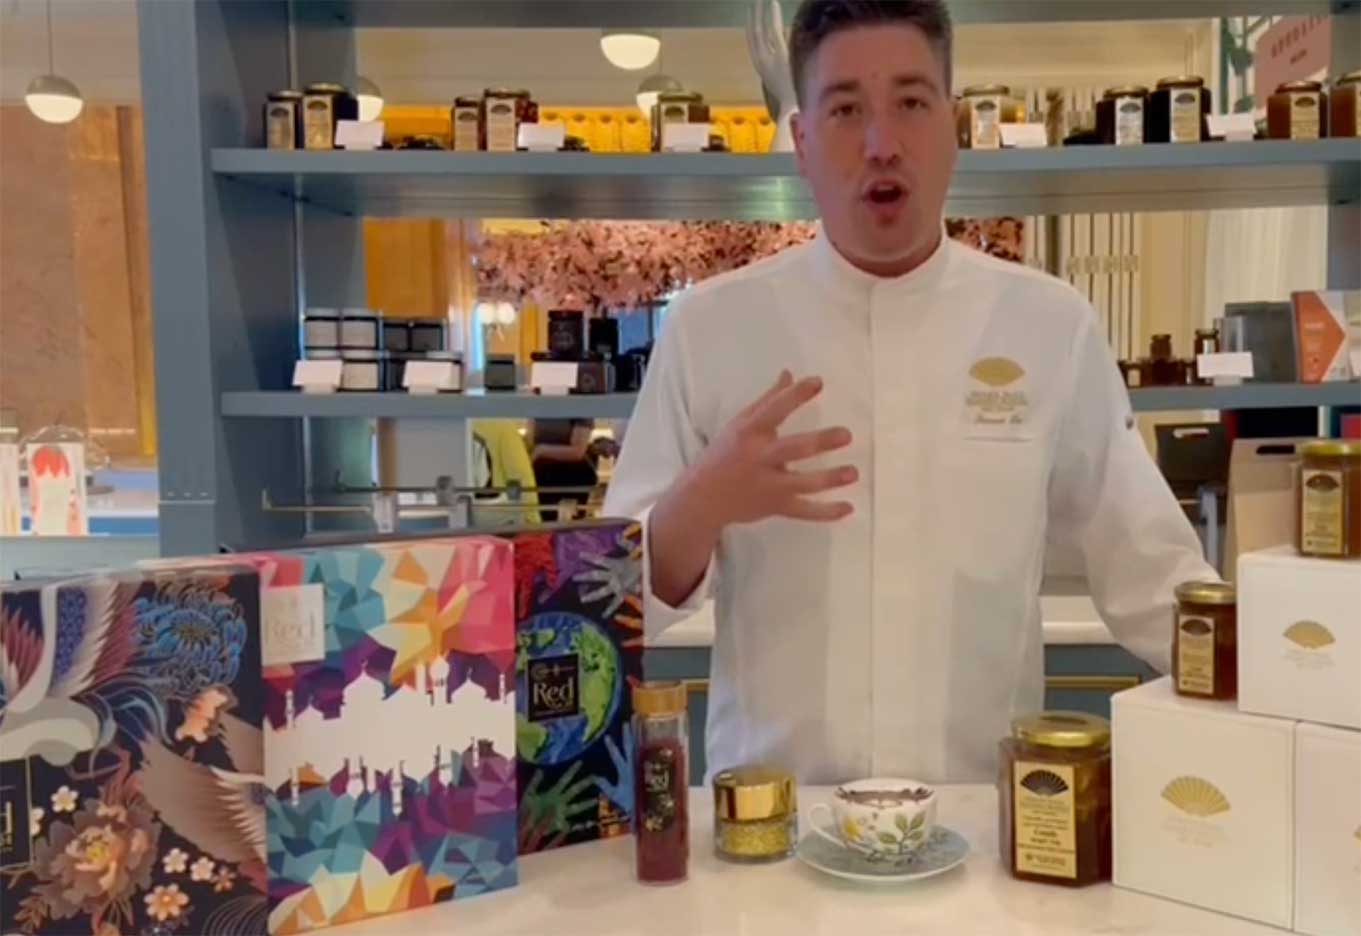 Photo of the famous Chef Francois Leo, standing next to a table showcasing Red24 Saffron and boxes of honey at the Emirates Palace.